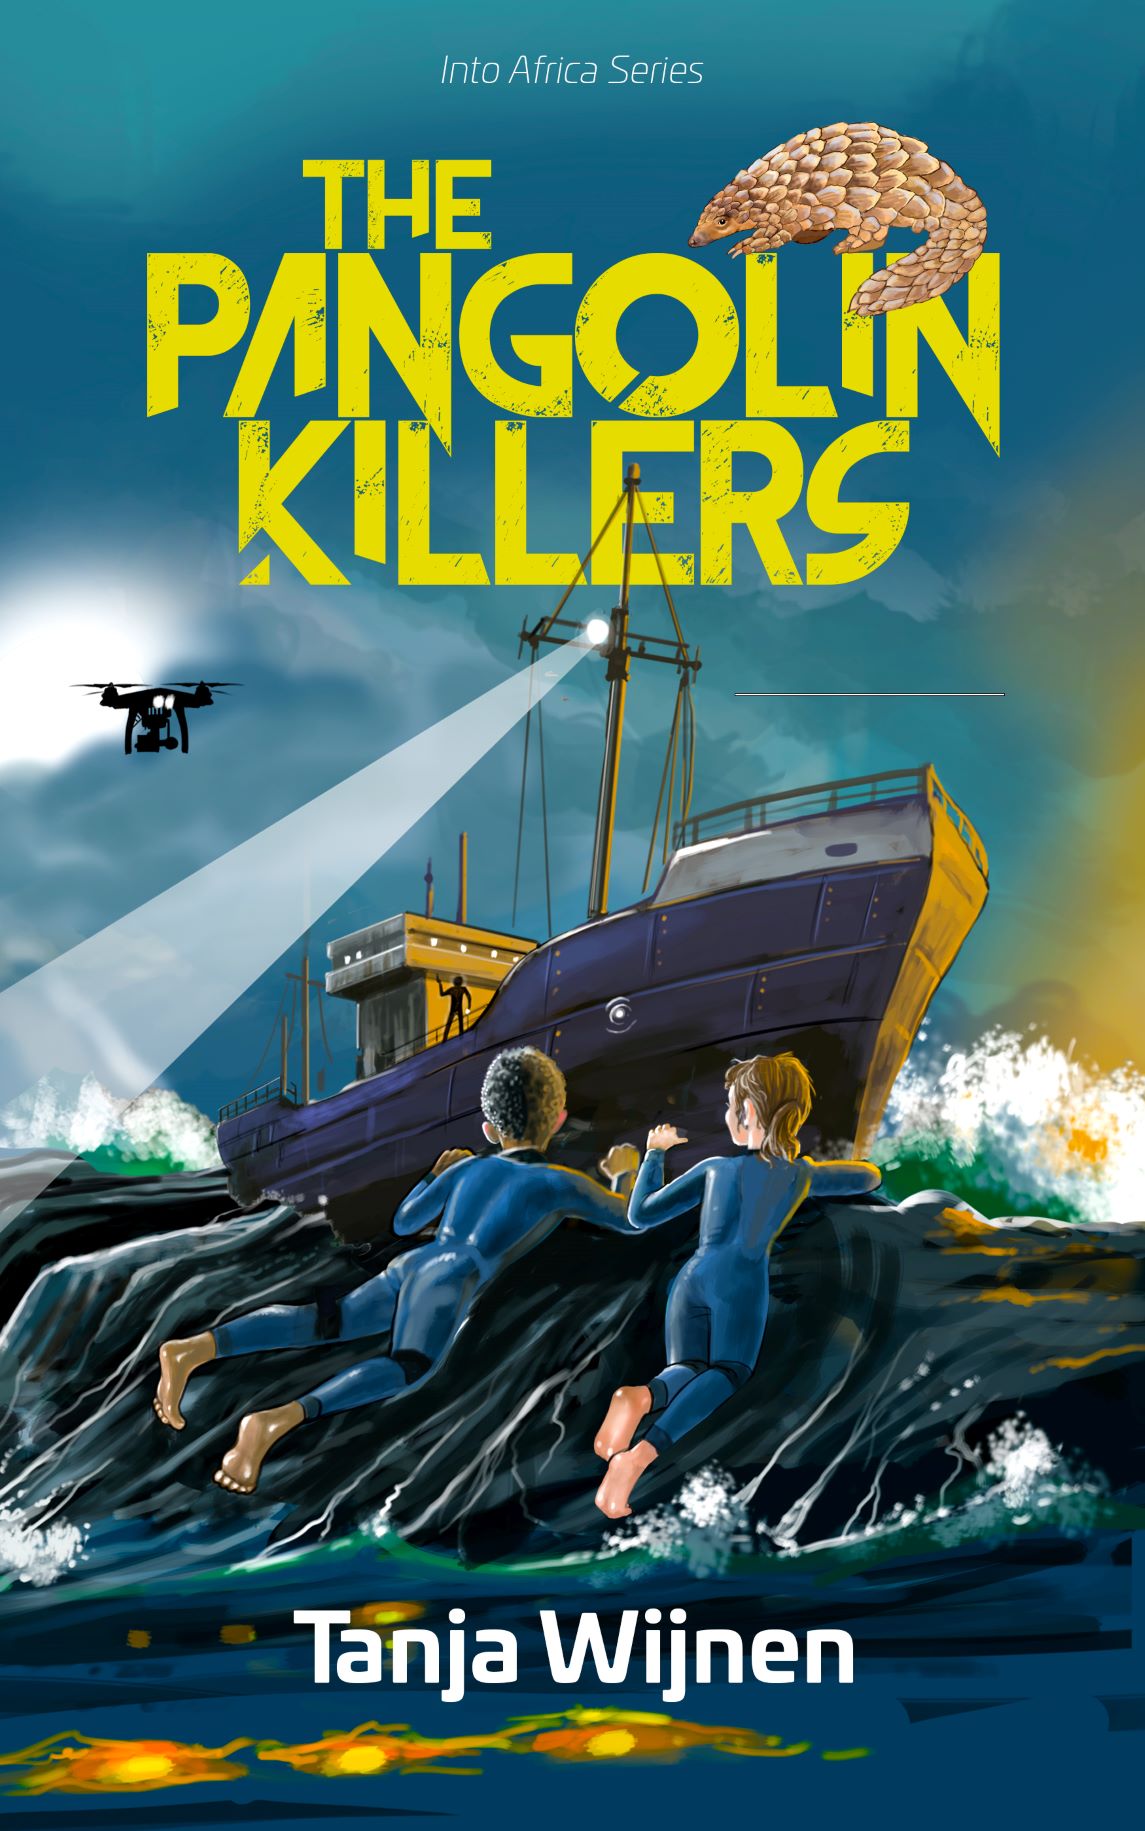 Cover of The Pangolin Killers, as uploaded on Amazon: Image of two children lying on a rock in rough seas, steering drone over ship wreck. A man with a gun is standing on the shipwreck.  Note: The Danish publisher that I have a contract with has advised that they will make a new, more modern cover. All the illustrations inside the book will stay. 